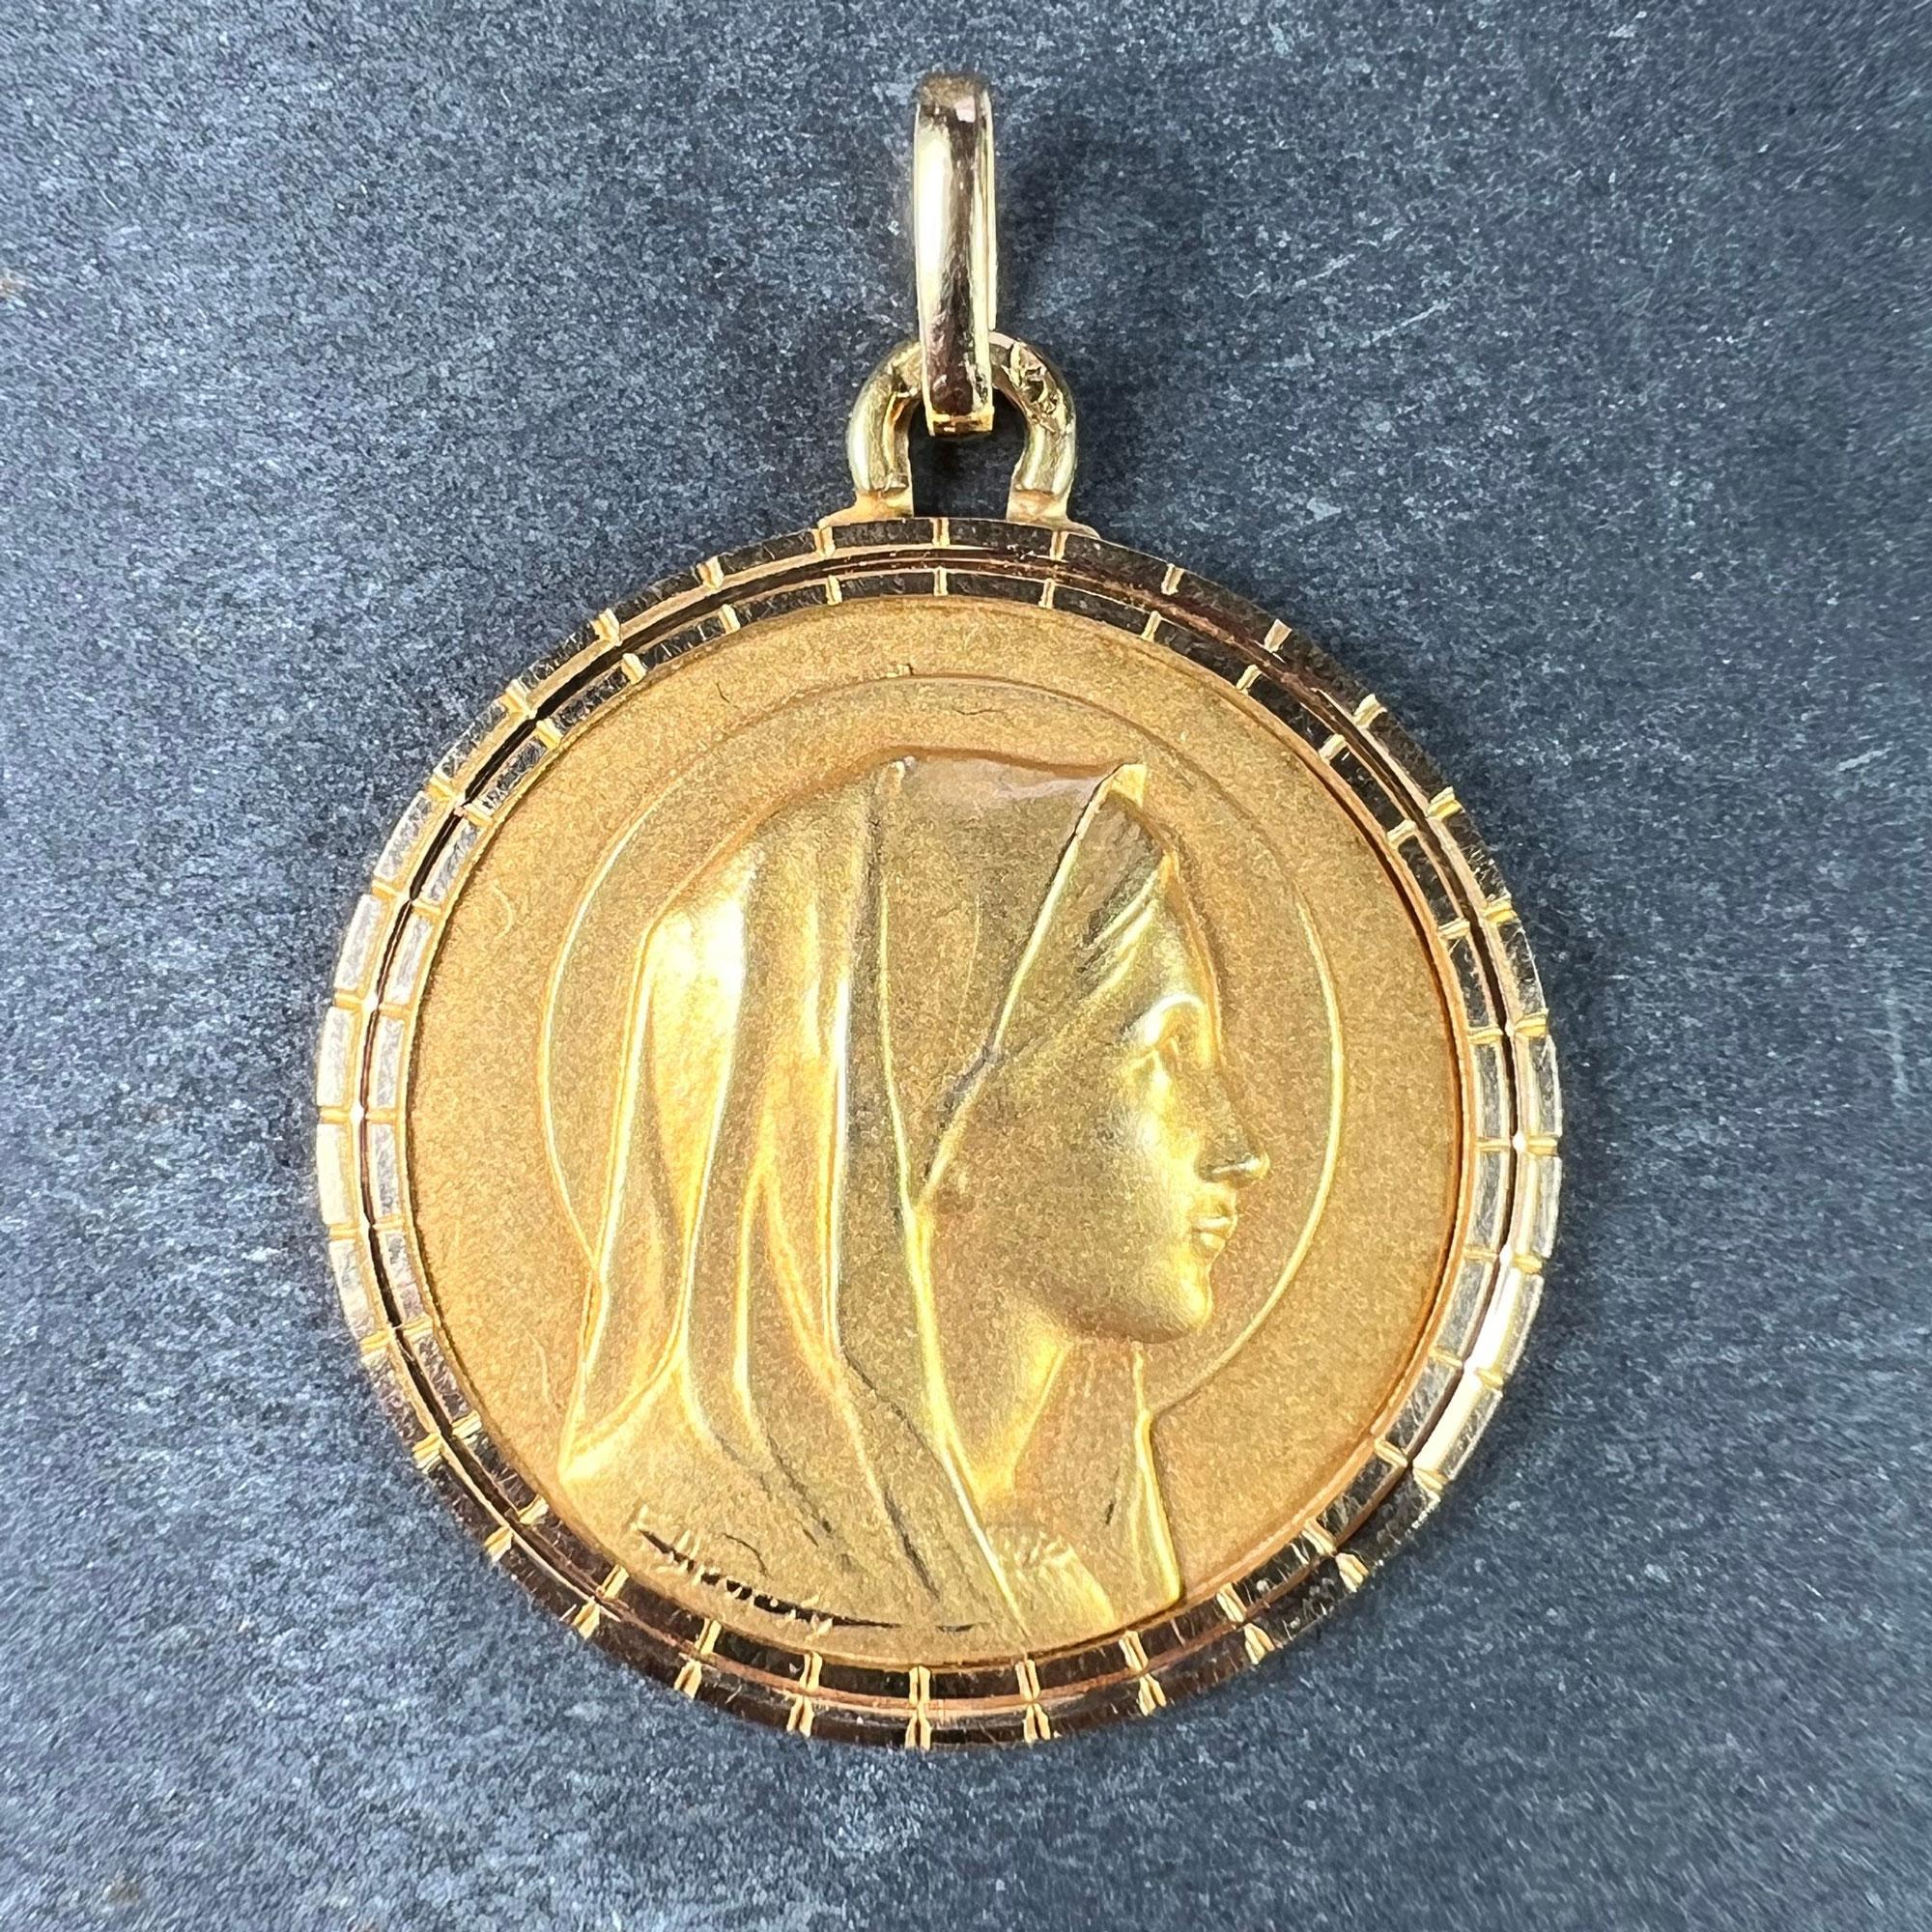 An 18 karat (18K) yellow gold pendant designed as a round medal depicting the Virgin Mary with a halo and a polished and ridged surround. Signed E. Dropsy. The reverse depicts a person praying at the feet of the Virgin Mary. Stamped with the eagle’s